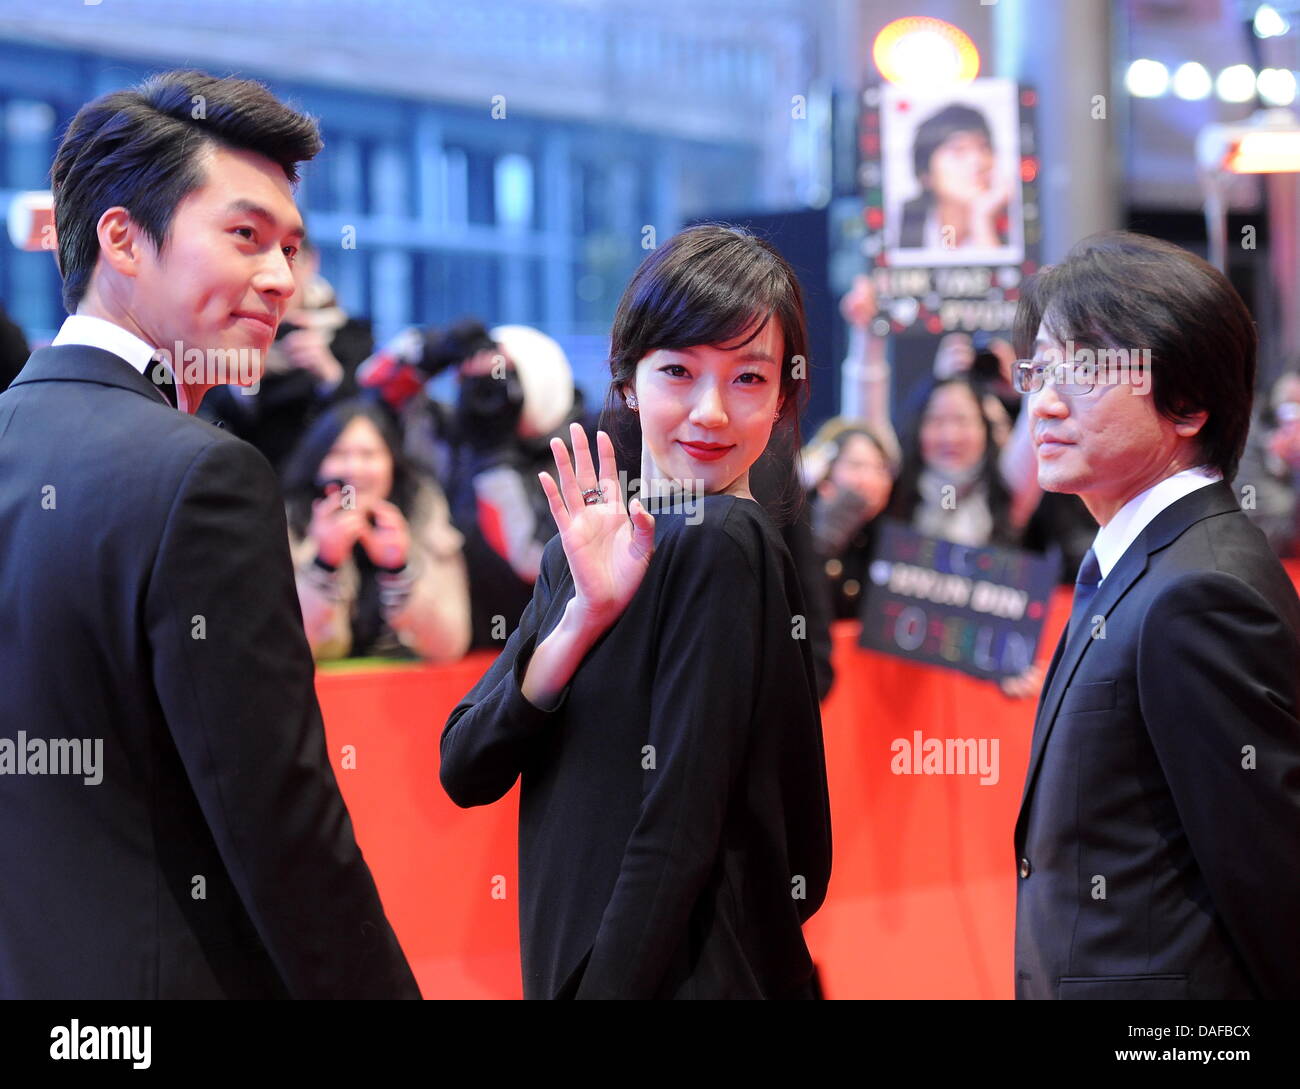 South Korean actors Hyun Bin (L) and Lim Soo-jung arrive with South Korean director Lee Yoon-ki for the premiere of the film 'Come Rain, Come Shine' ('Saranghanda, Saranghaji Anneunda') during the 61st Berlin International Film Festival in Berlin, Germany, 17 February 2011. The film is running in the competition of the International Film Festival. The 61st Berlinale takes place fro Stock Photo